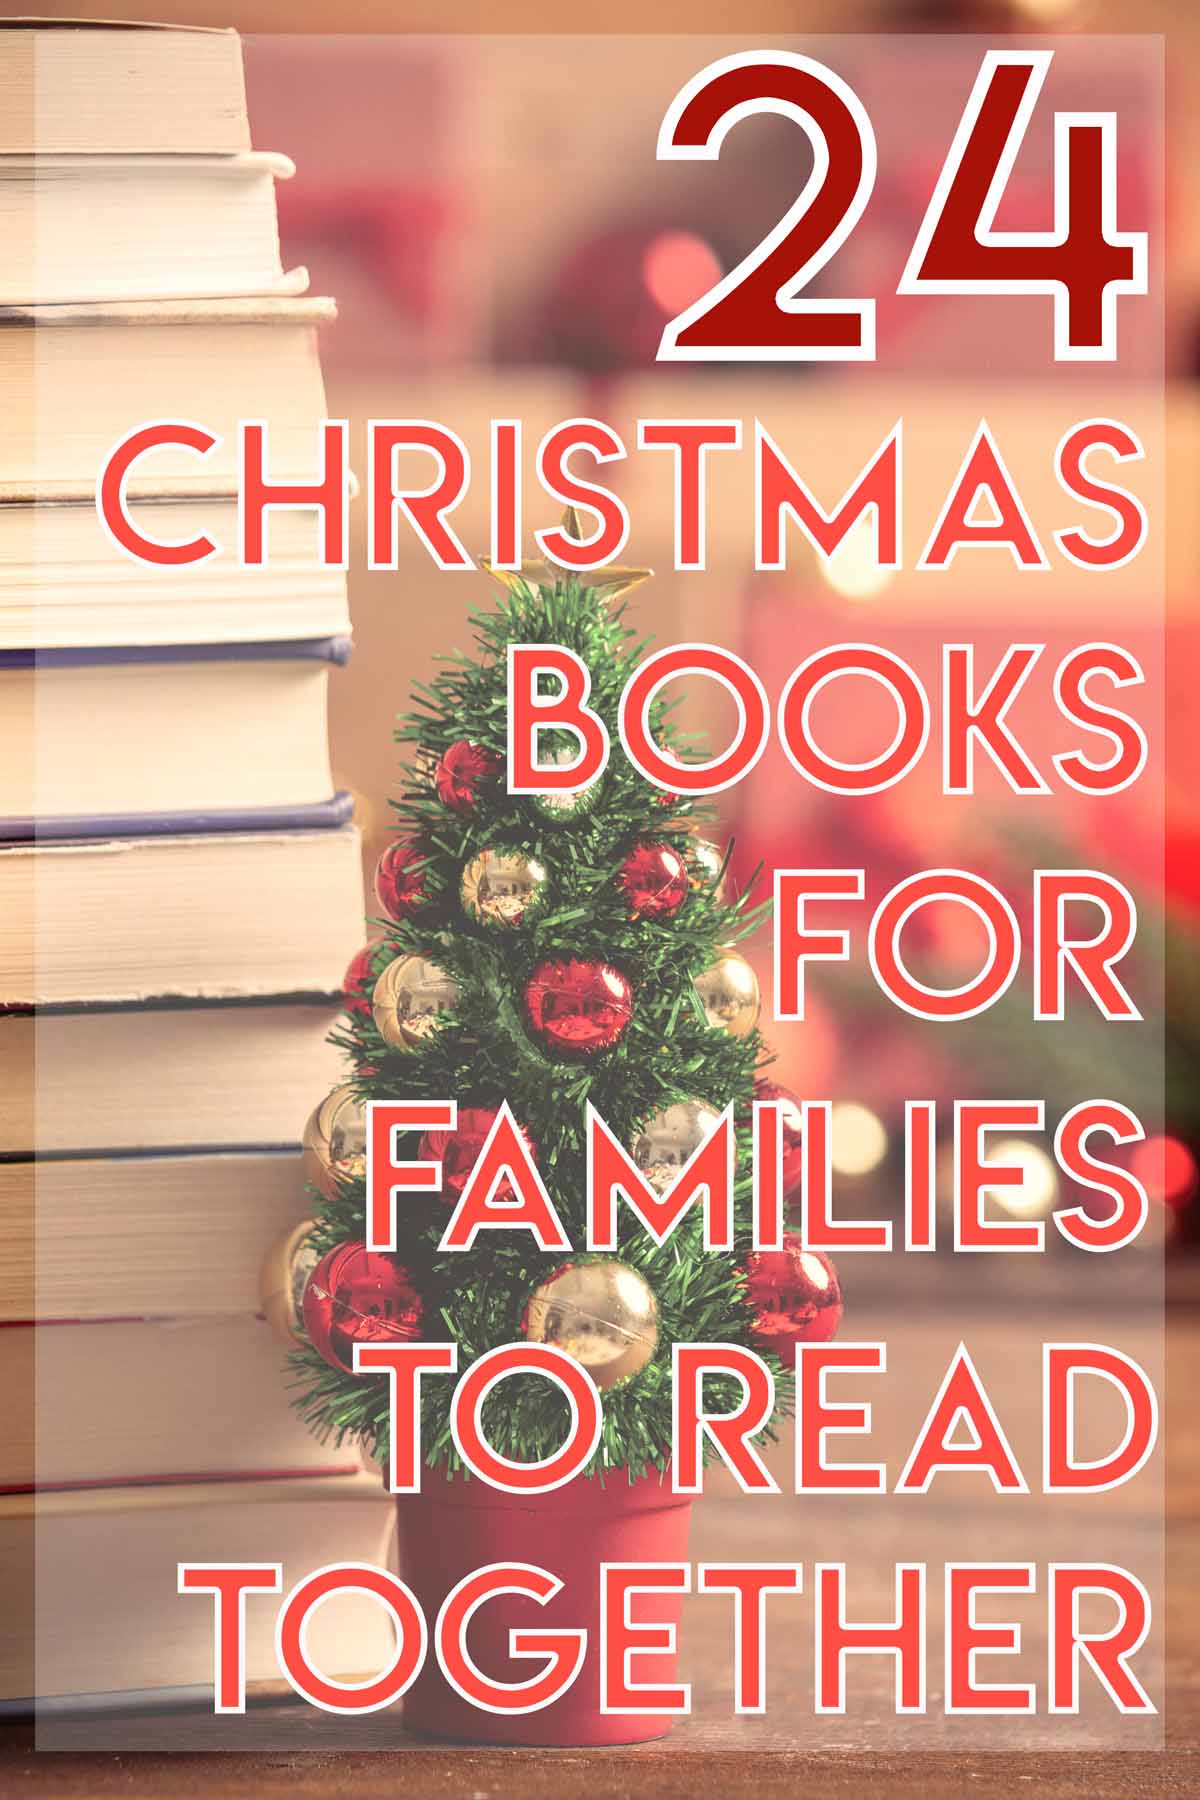 Start your family tradition of reading one Christmas story each day in December! Here is a wonderful list of books to start with! via @lara_neves